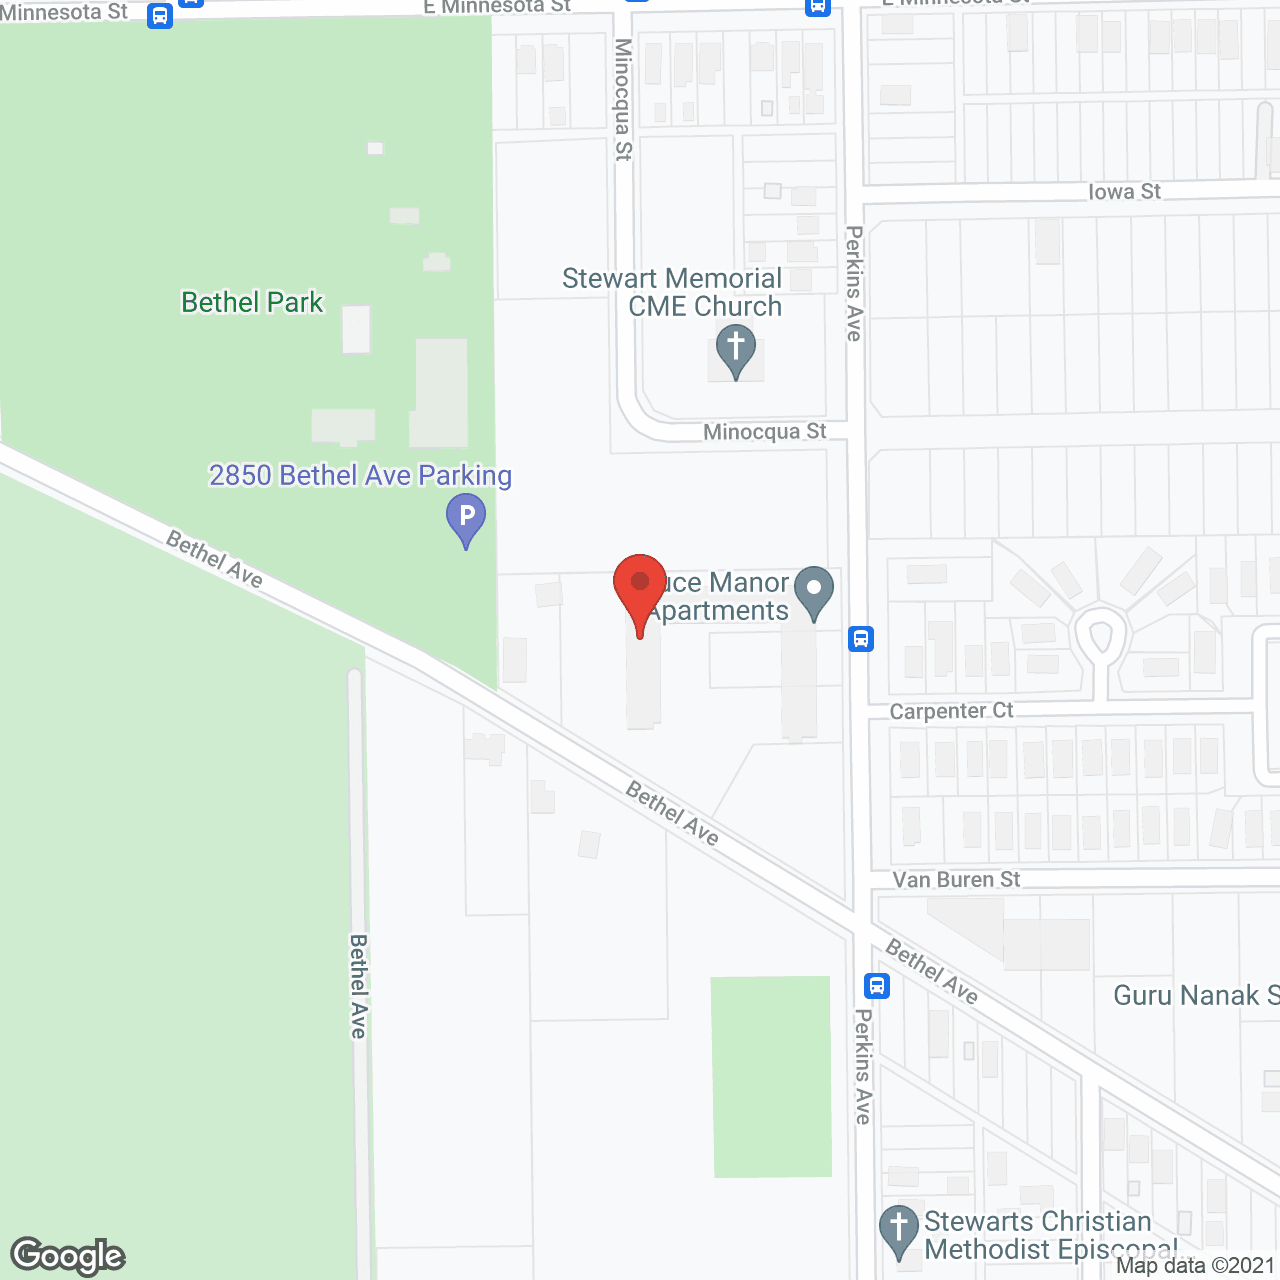 Spruce Manor Apartments in google map